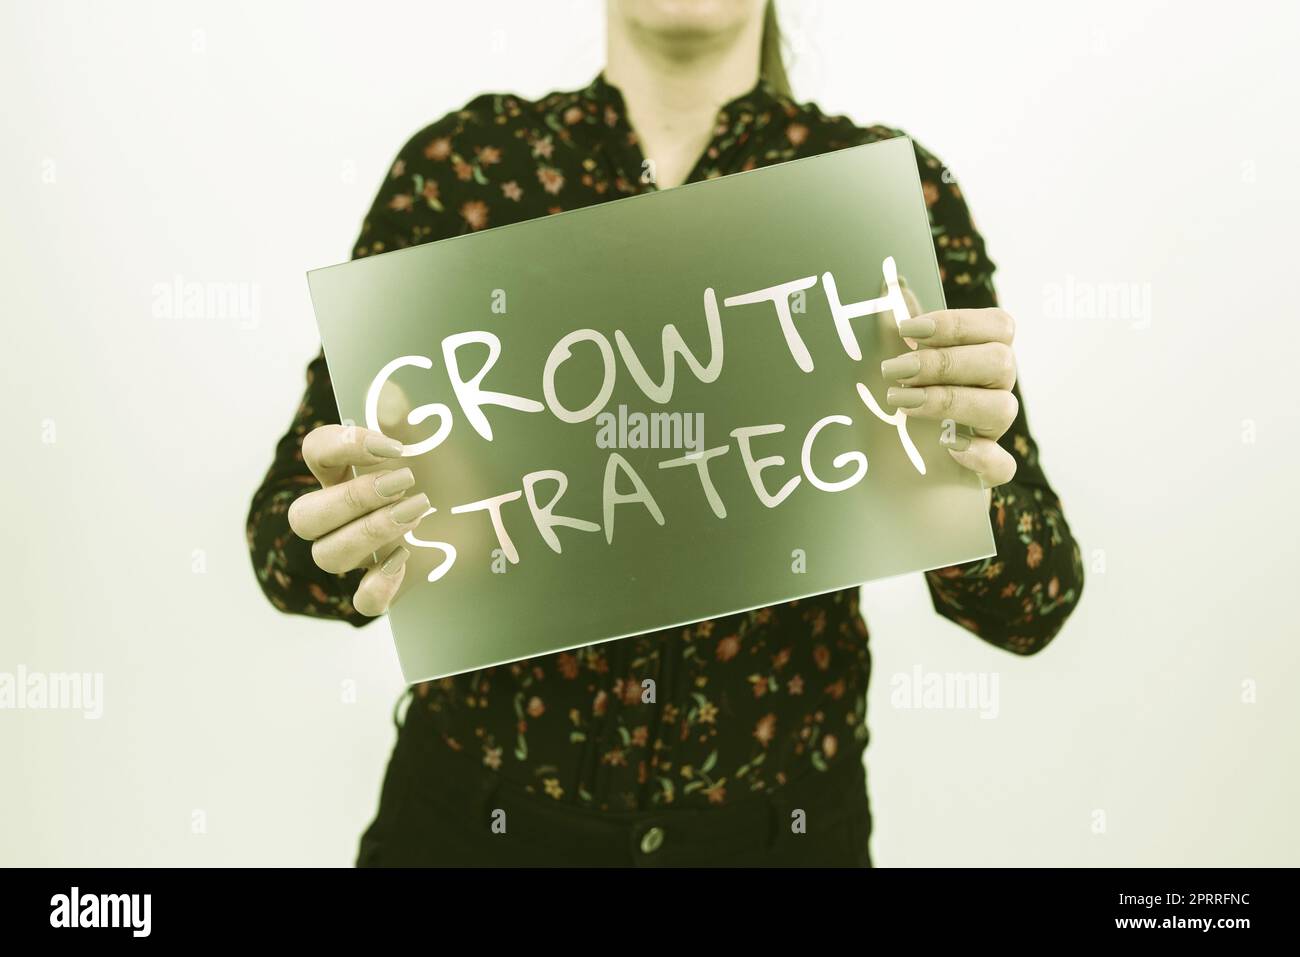 Conceptual caption Growth StrategyStrategy aimed at winning larger market share in short-term. Business idea Strategy aimed at winning larger market share in shortterm Stock Photo